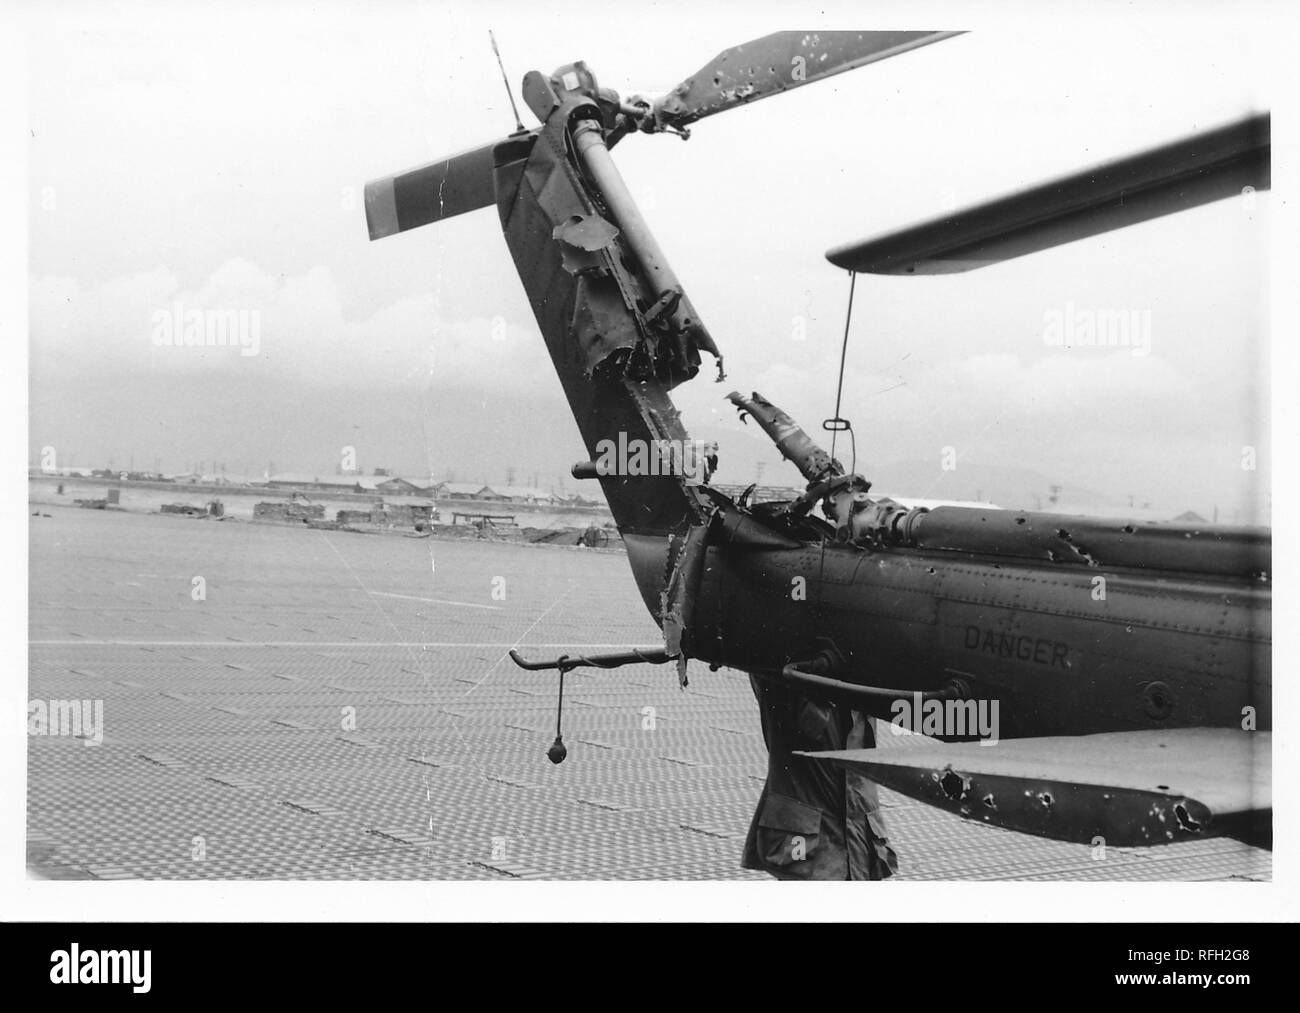 Black and white photograph, showing the heavily damaged tail of a Bell UH-1 Iroquois ('Huey') helicopter, with the trunk of a man wearing a military jacket, whose head is obscured by the tail boom, and crates and bunkers, visible in the background, photographed during the Vietnam War, 1968. () Stock Photo